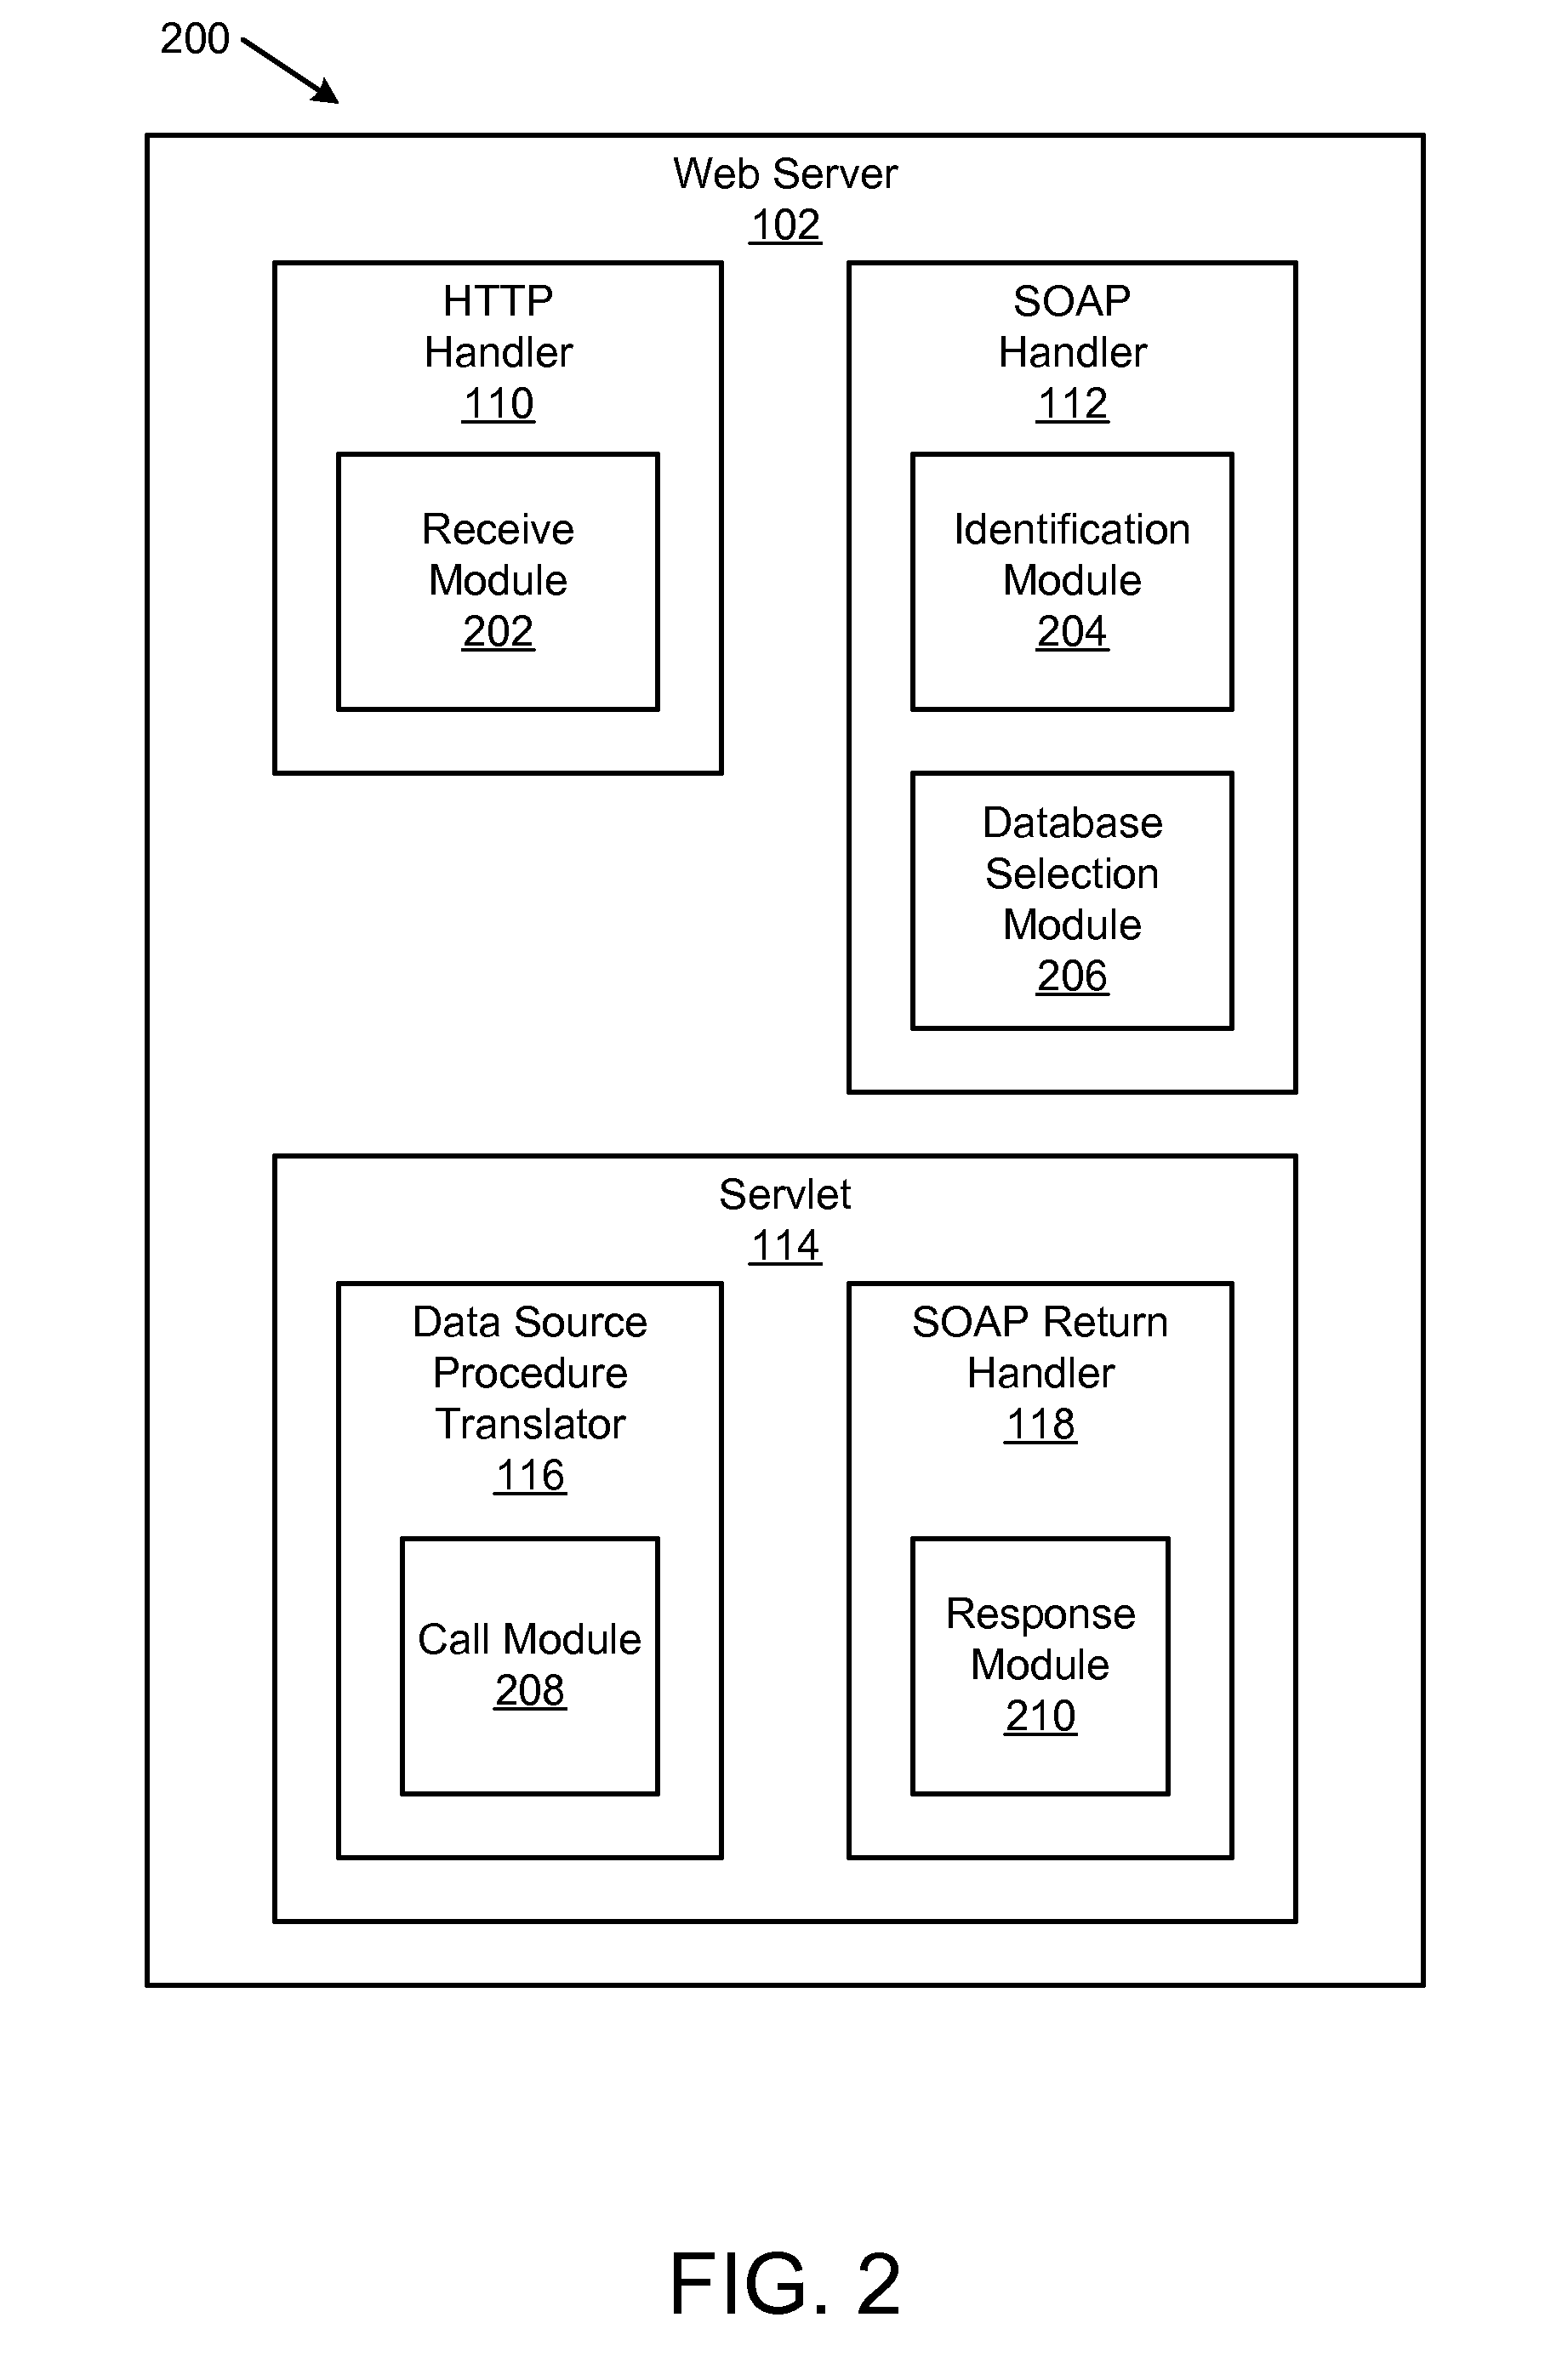 Apparatus, system, and method for soap access to data source procedures